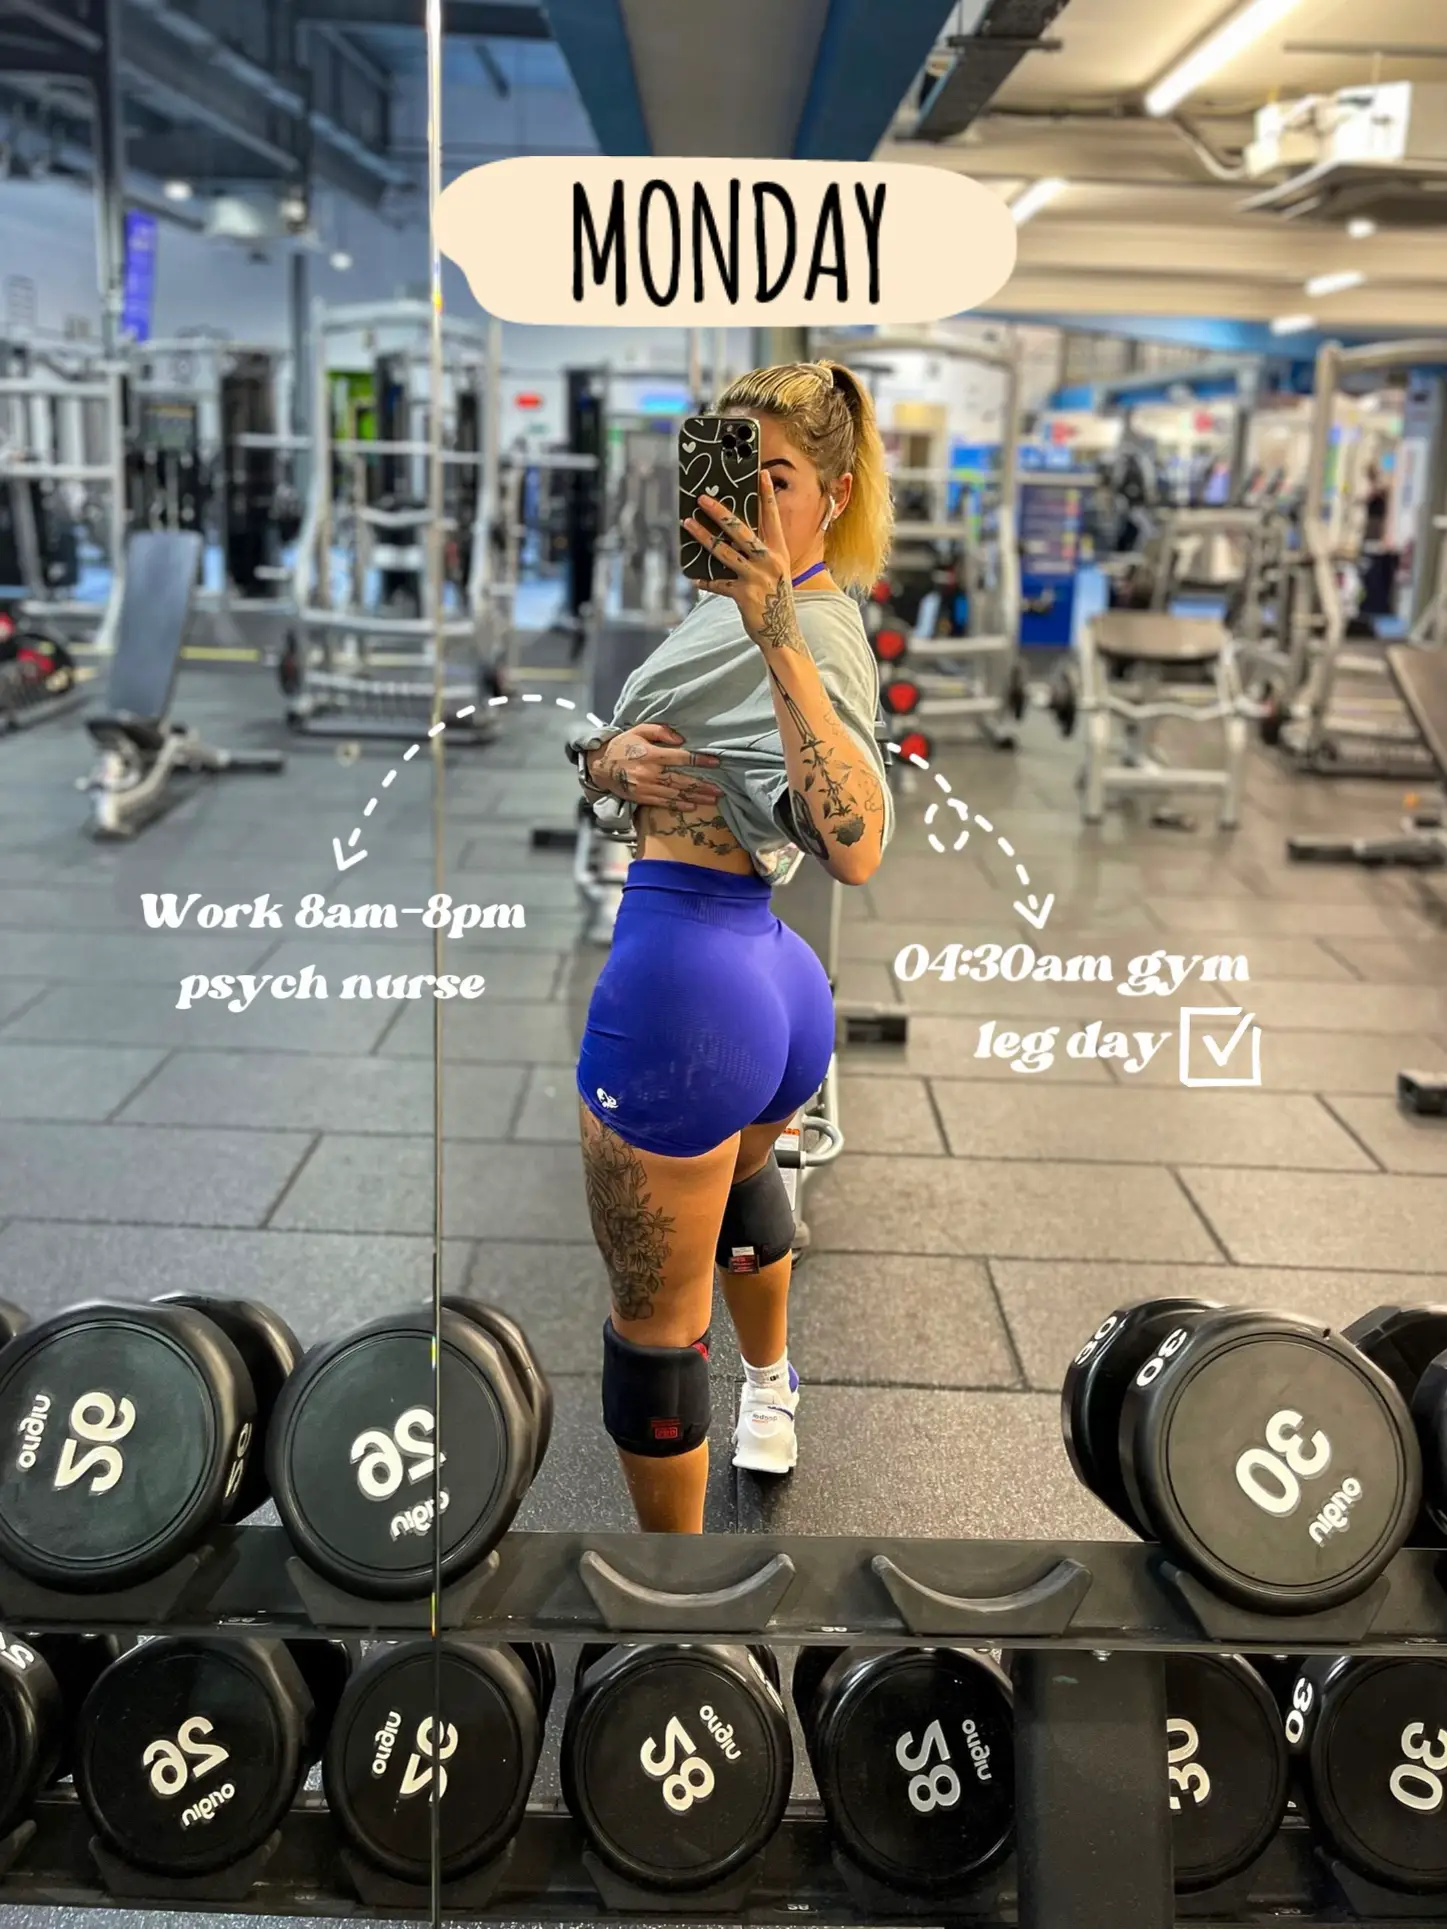 ⏰ Gym Tips Posted Every Day!⏰ on Instagram: 💪𝗕𝗔𝗖𝗞 𝗗𝗔𝗬